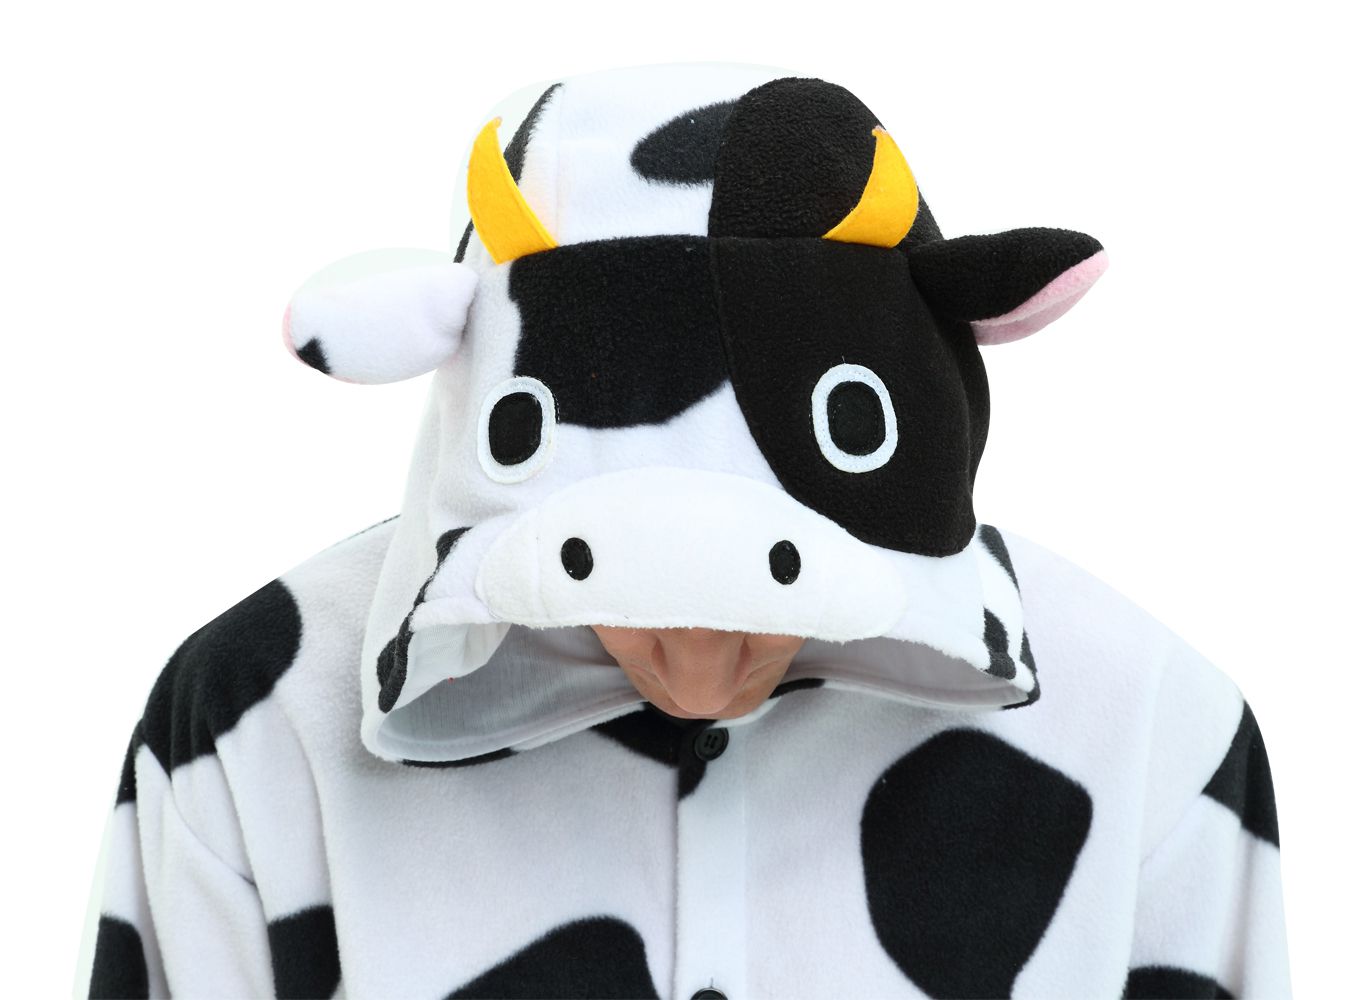 Cow Animal Onesie For Adults and Teenagers